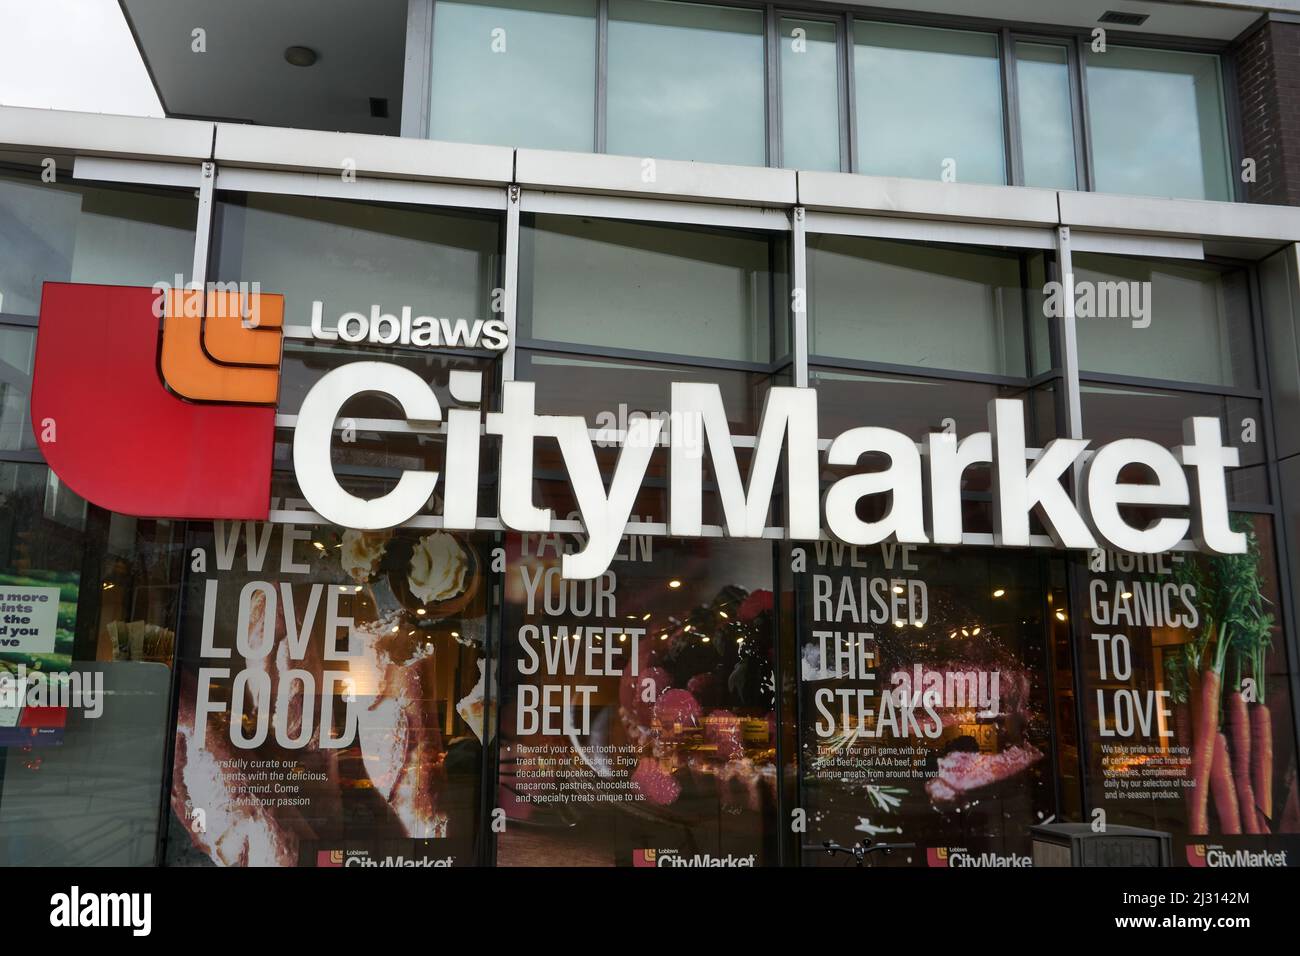 Loblaws City Market grocery store on Arbutus Street in Vancouver, British Columbia, Canada Stock Photo